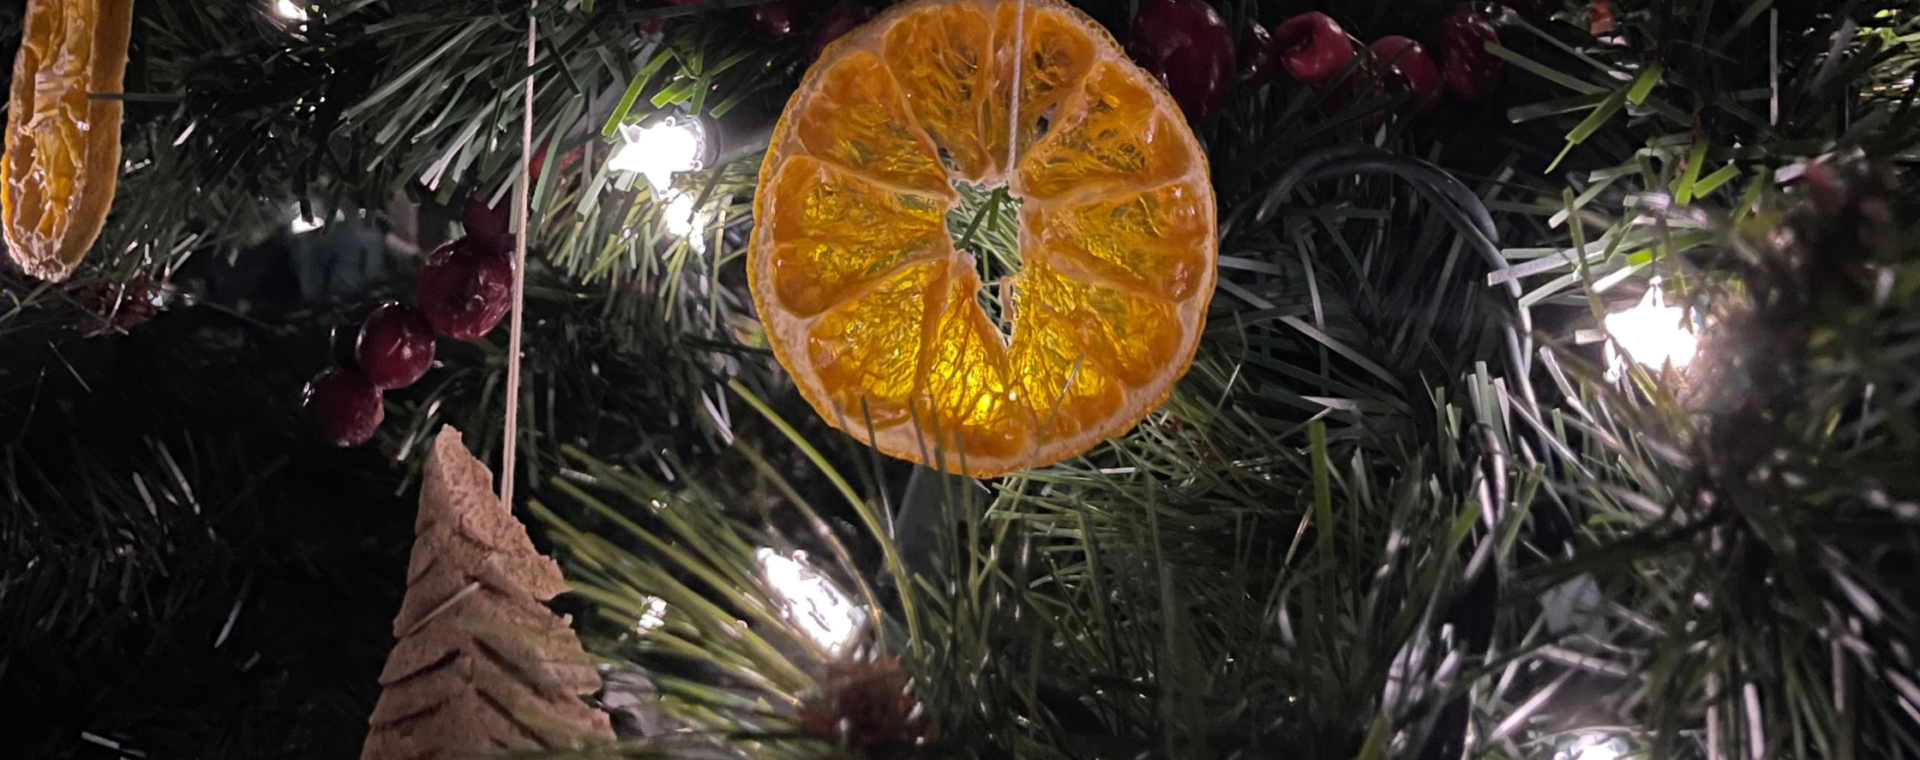 How to DIY Christmas Tree Ornaments